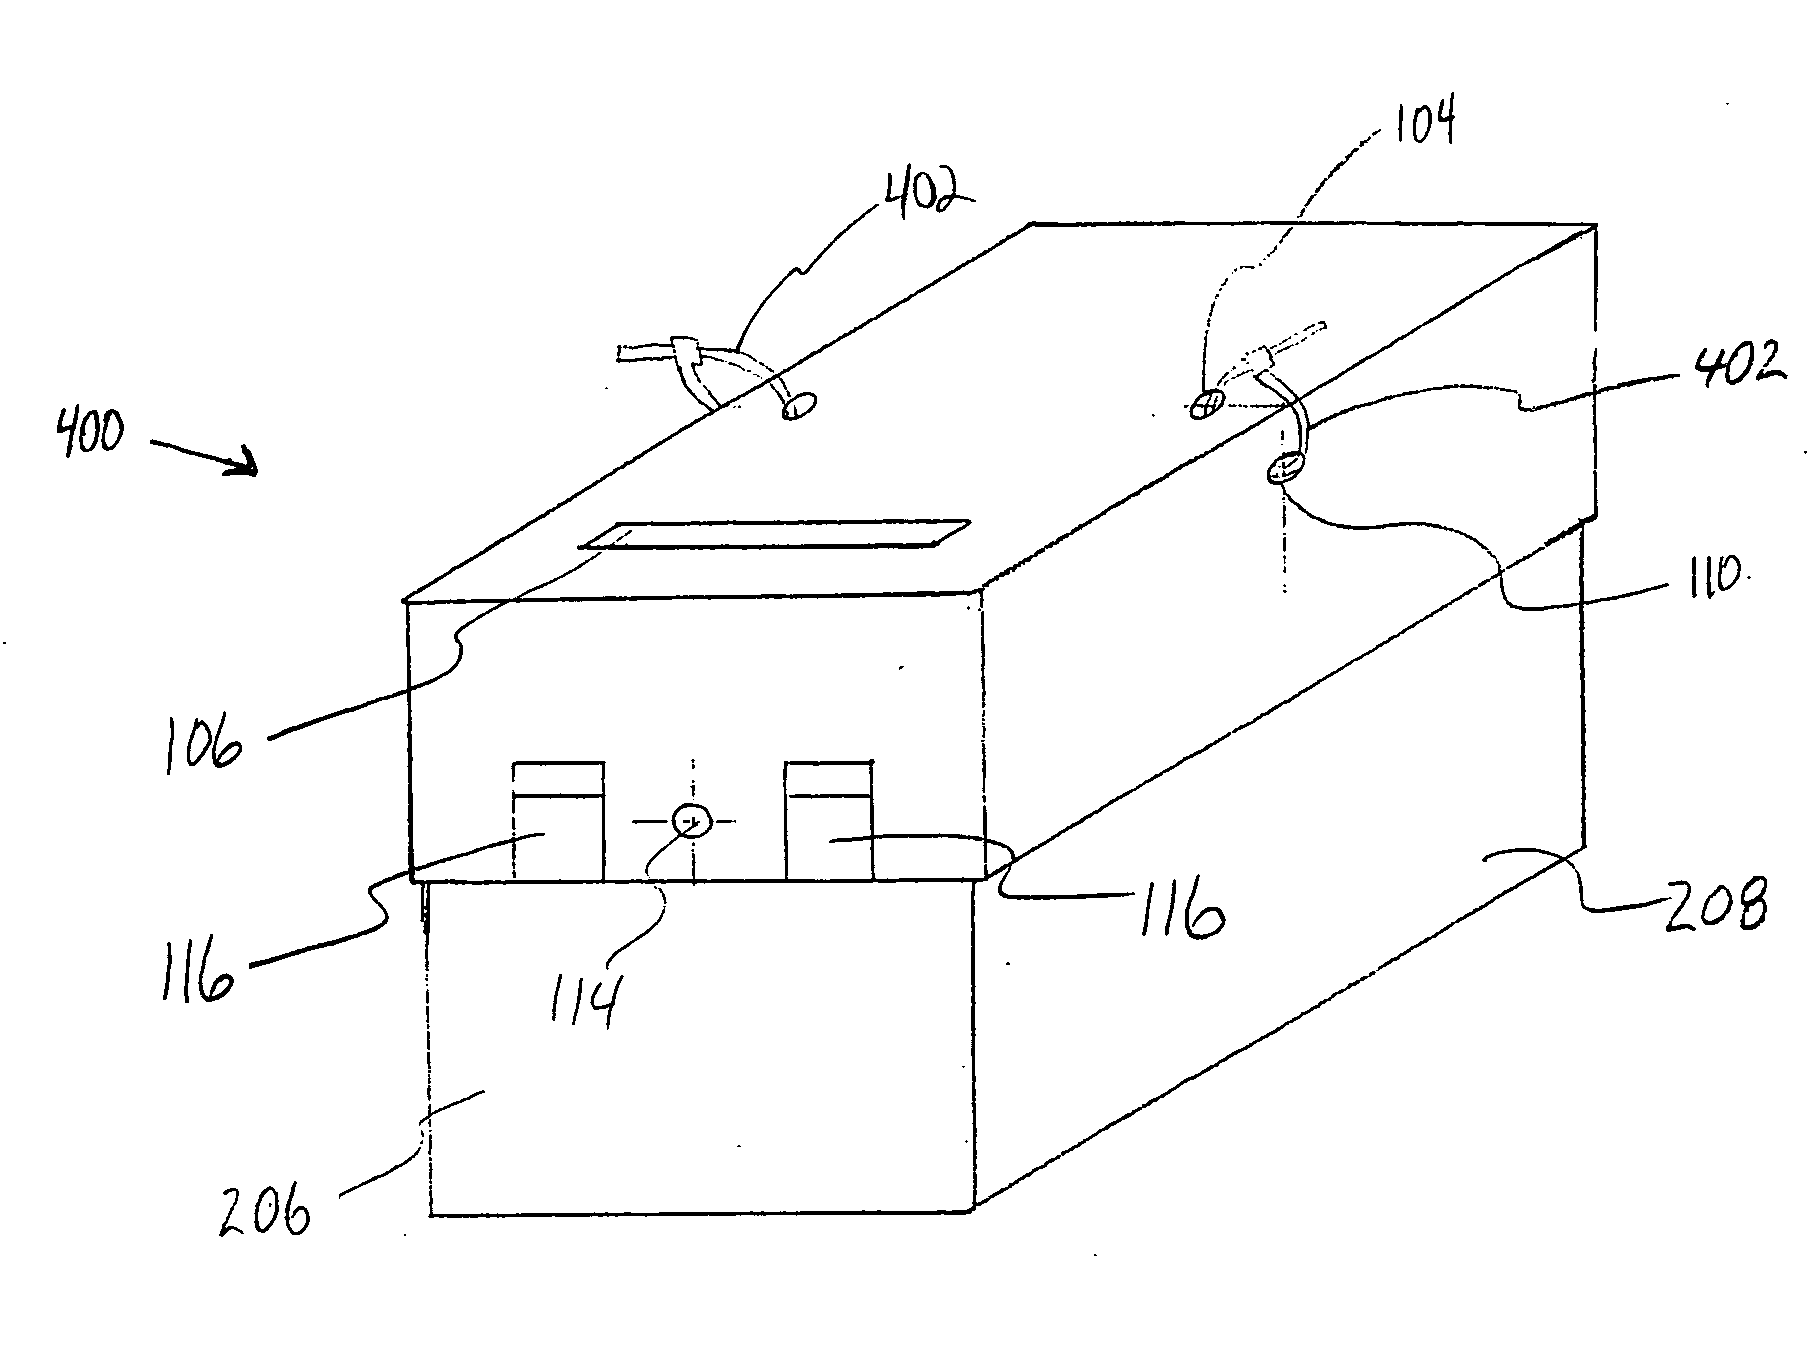 System for secure collection and disposal of large volumes of documents